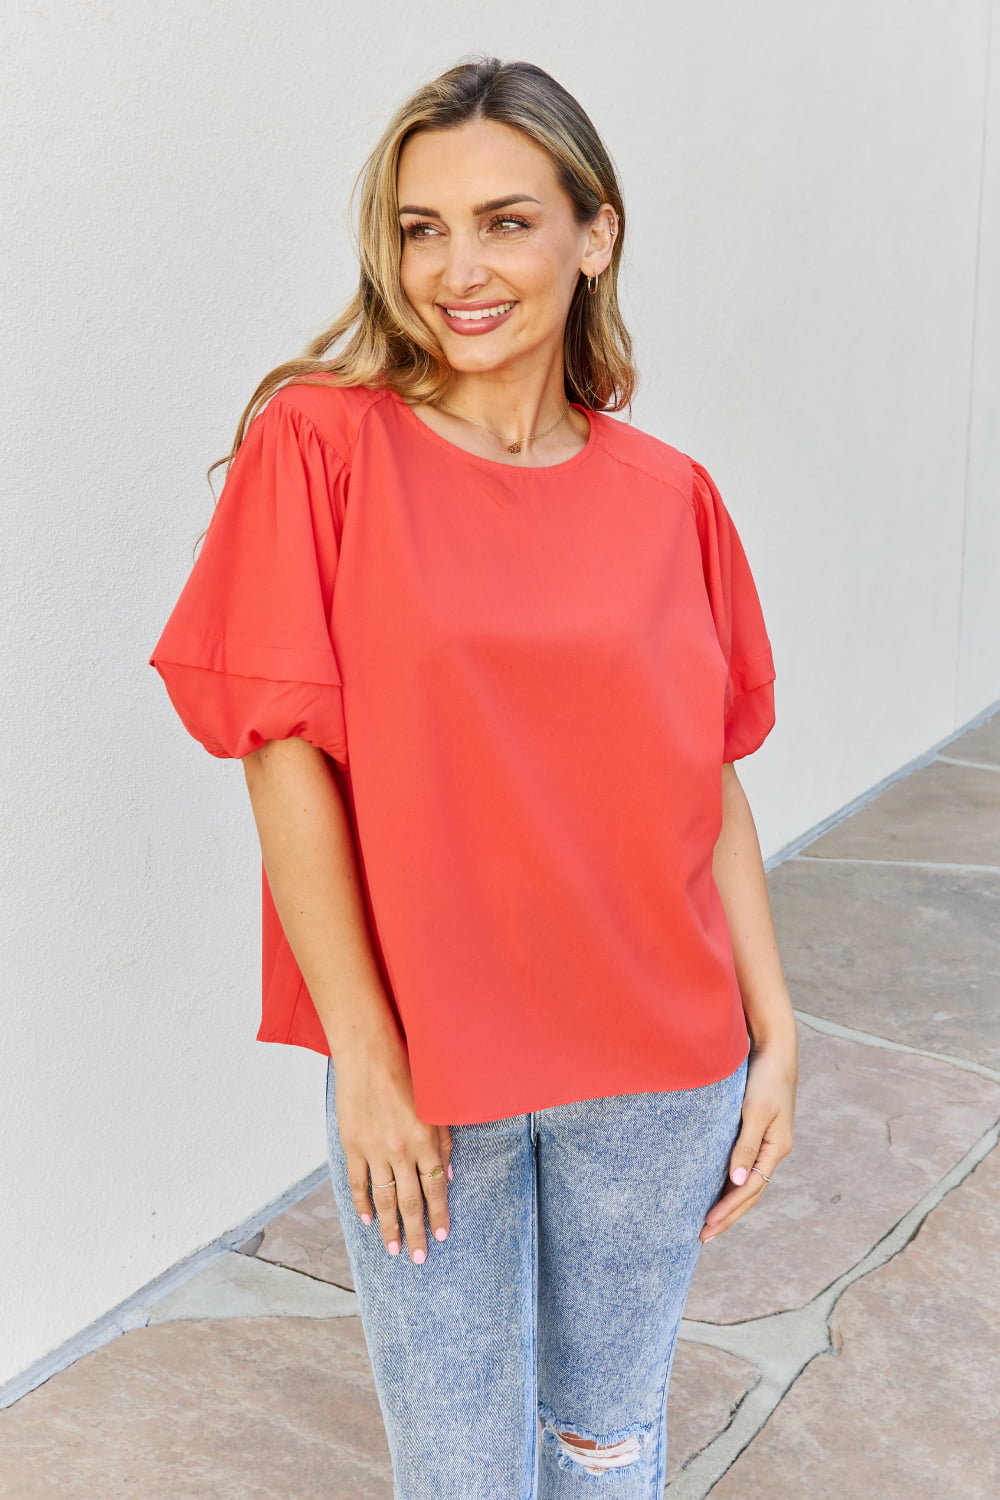 Sweet Innocence Full Size Puff Short Sleeve Top In Tomato